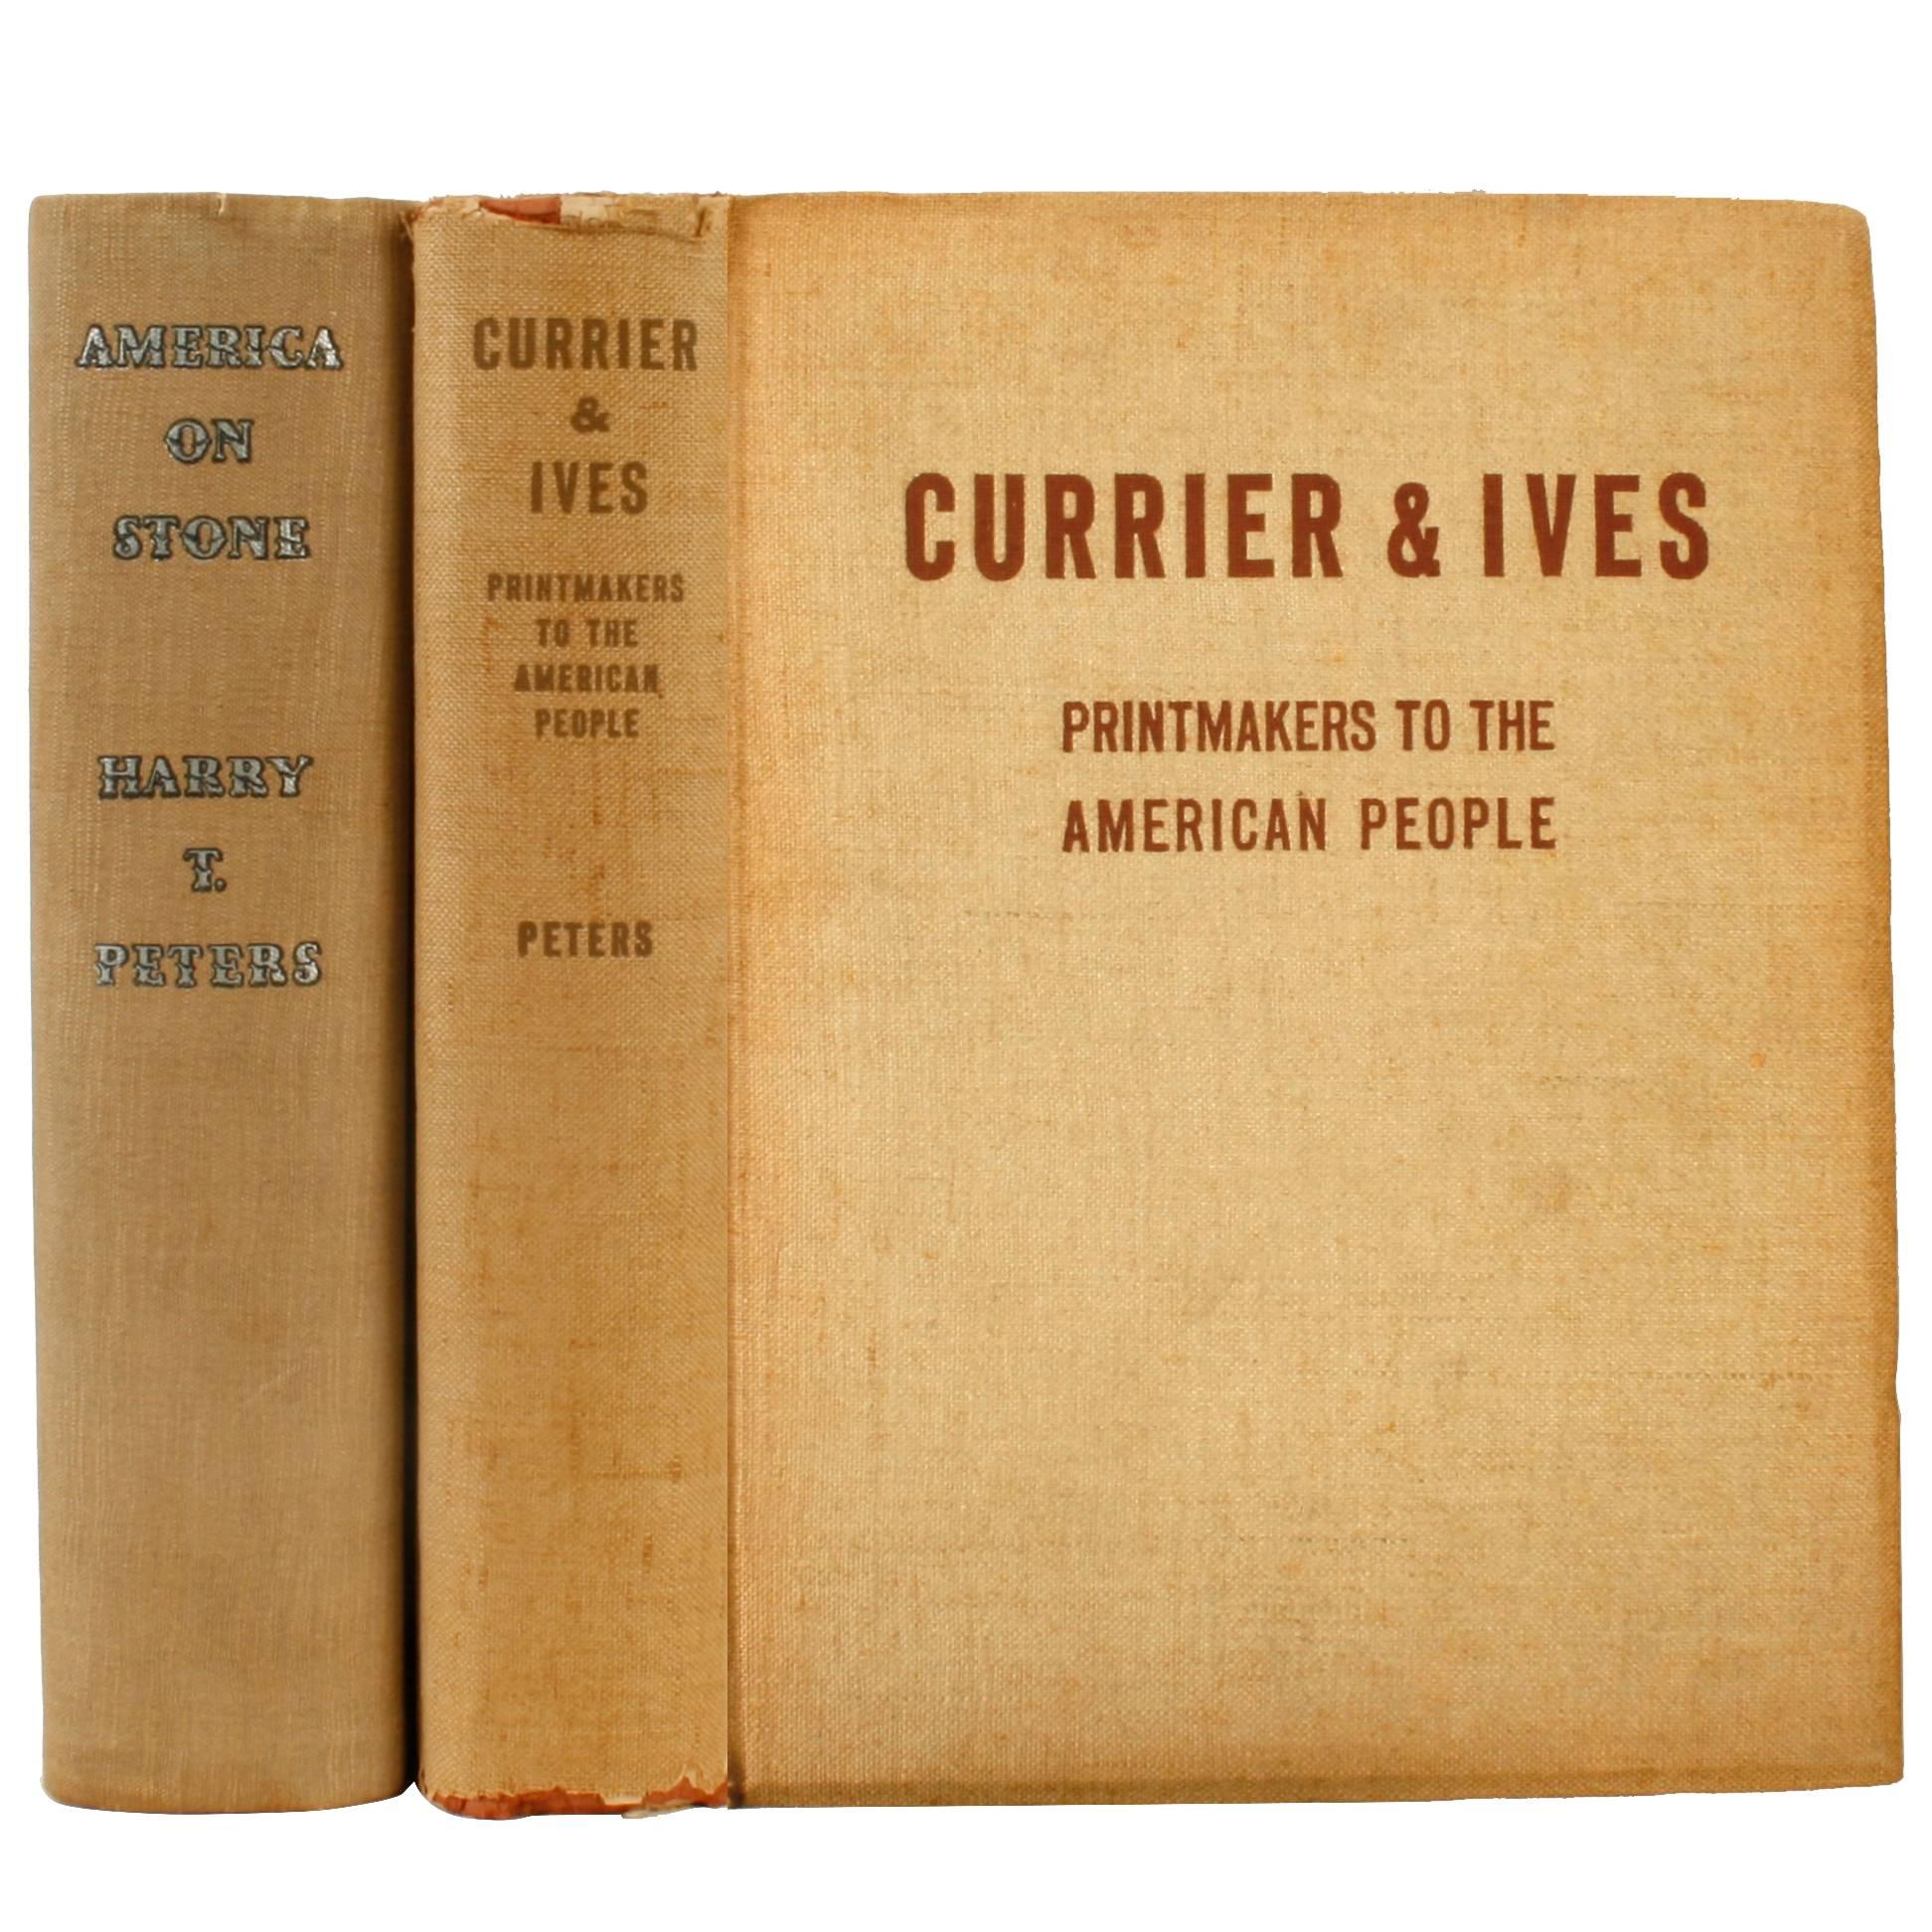 Currier & Ives, Printmakers to the American People, America on Stone, Pr. 1st Ed